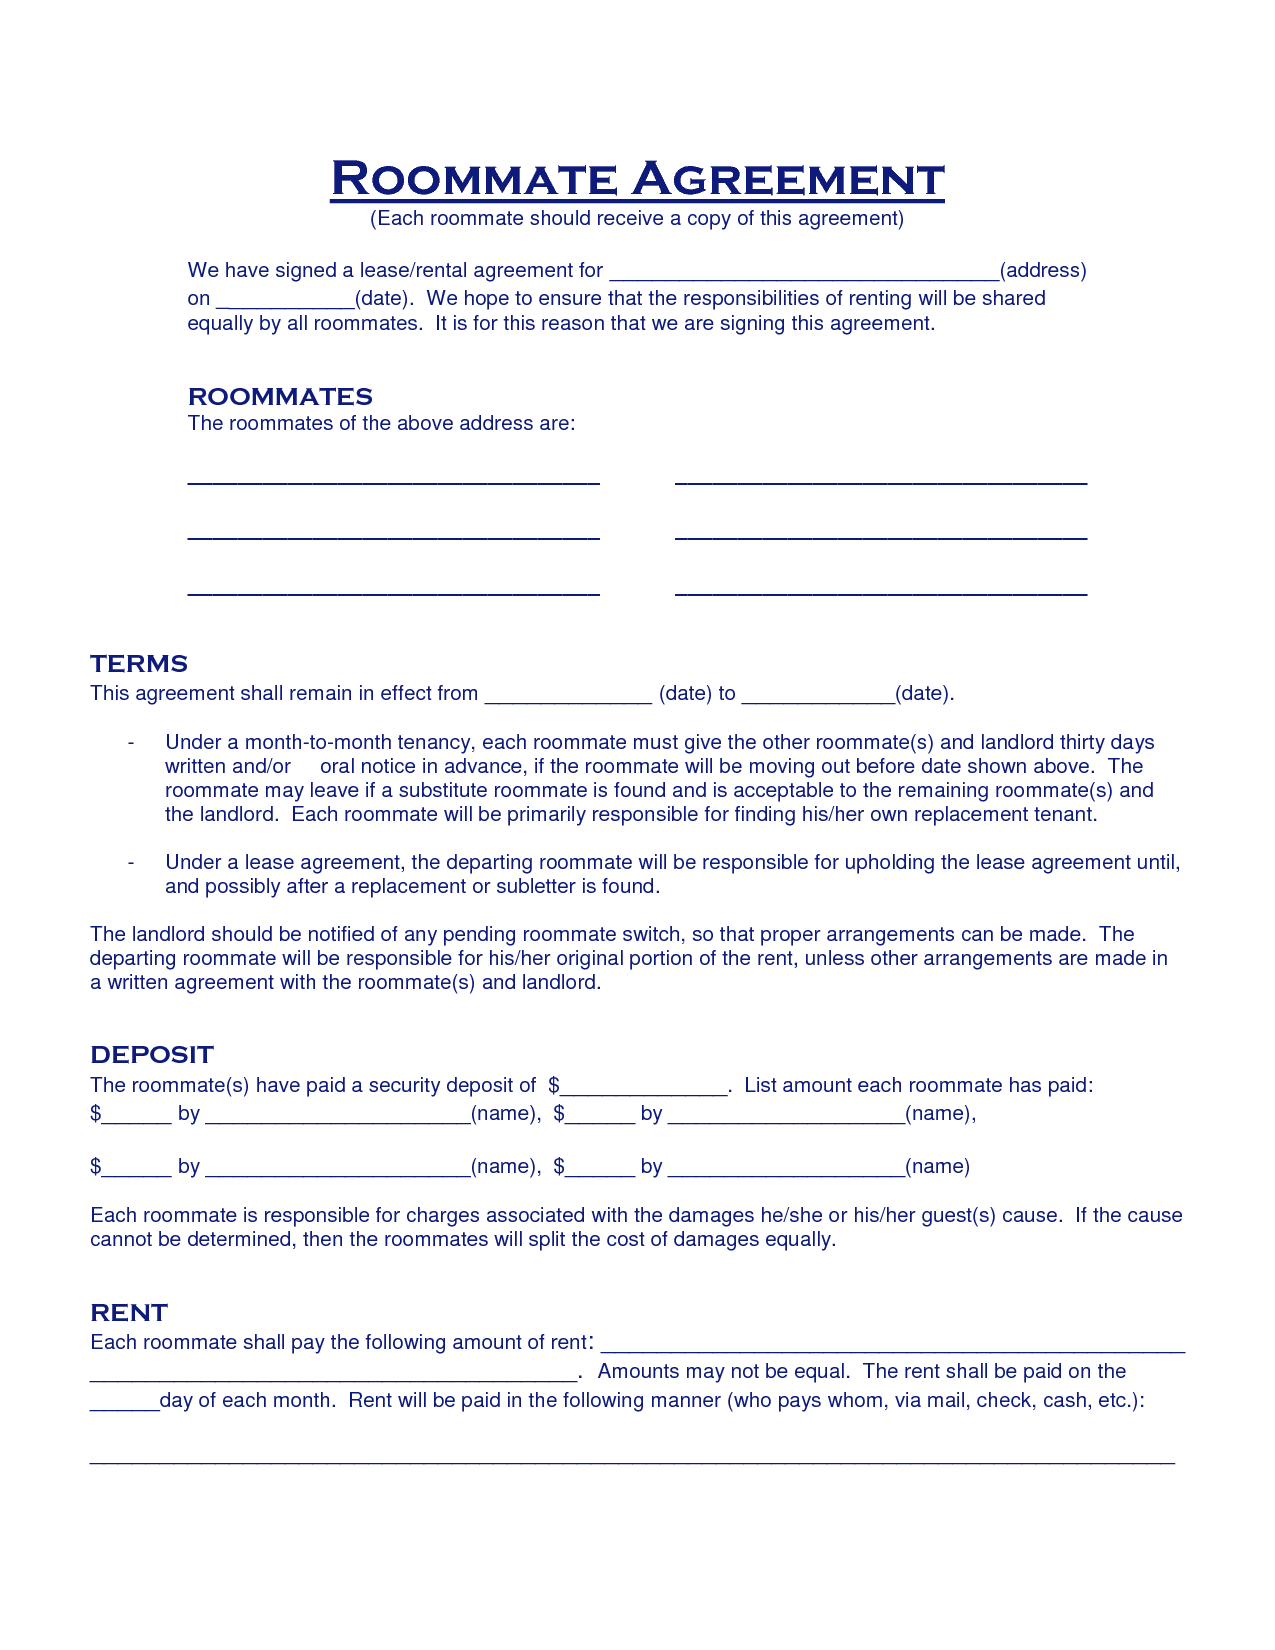 Roommate Contract Free Printable Documents